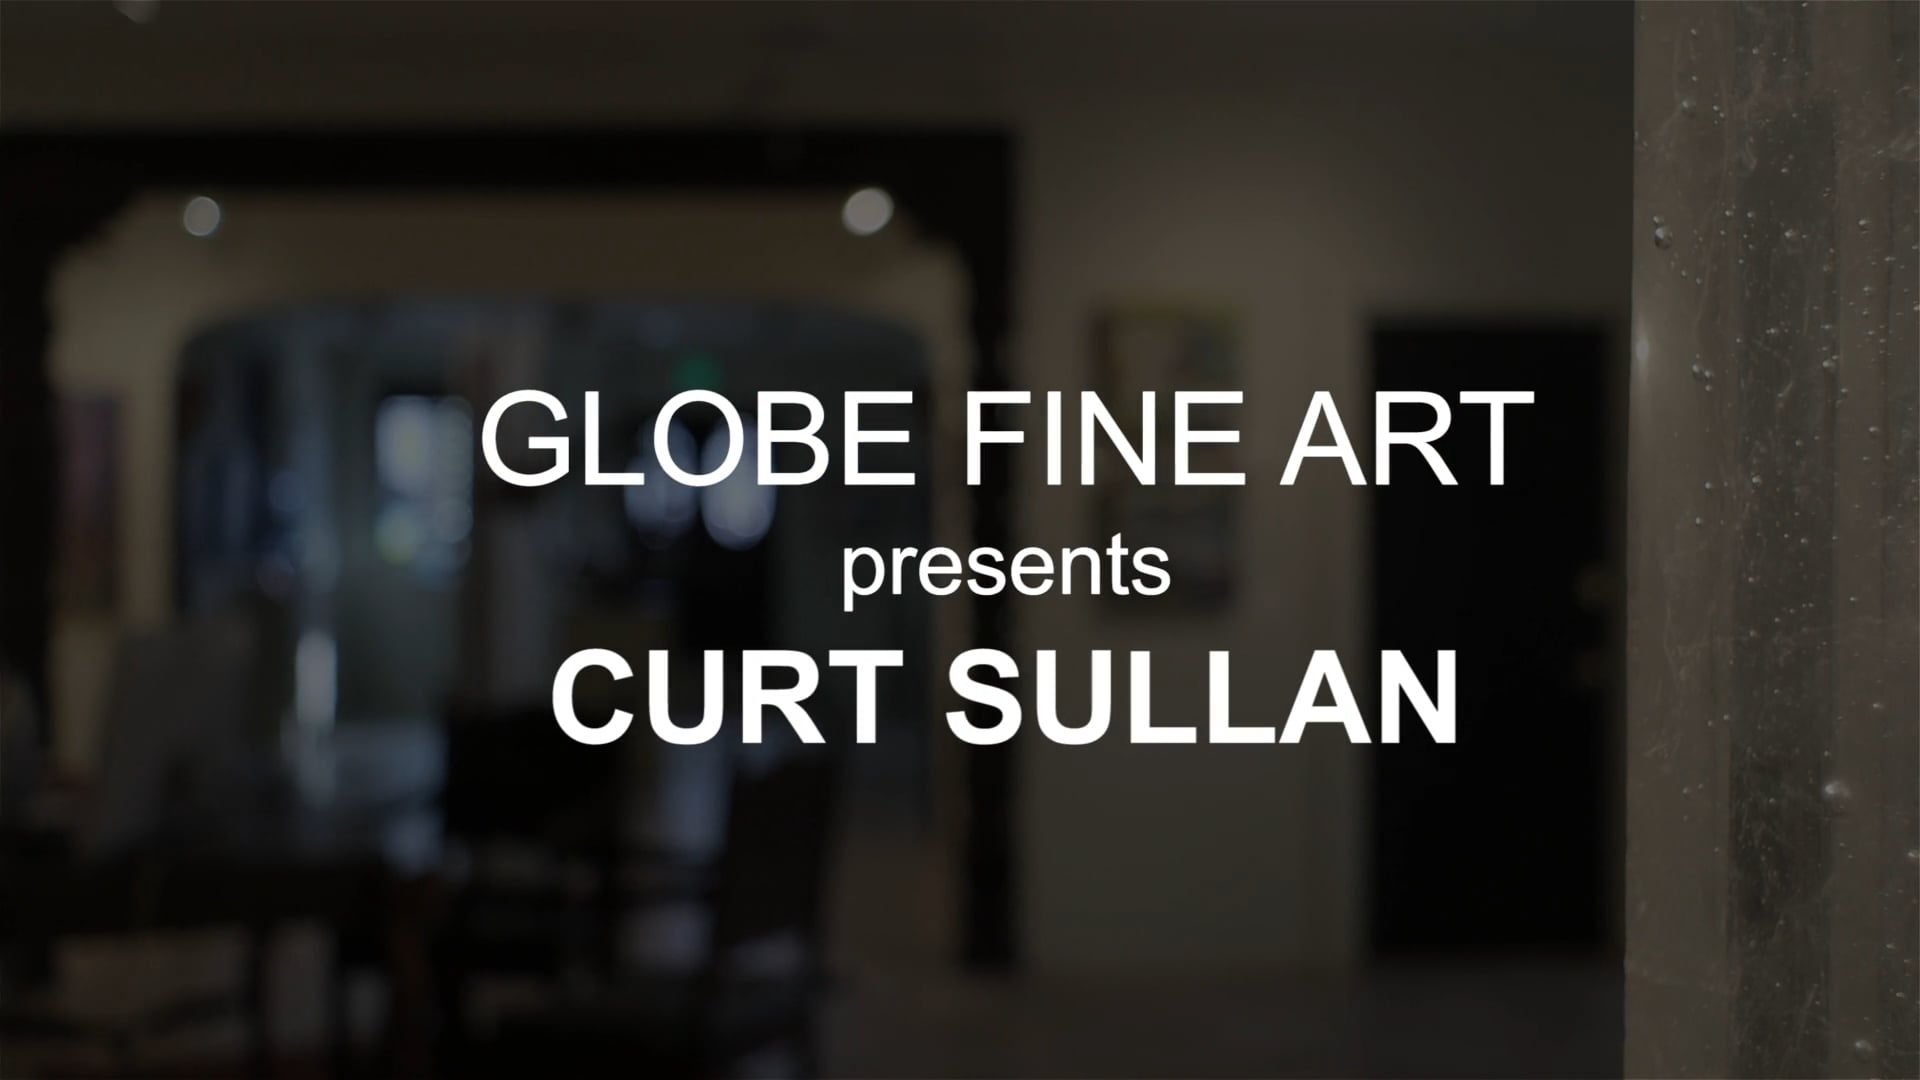 CURT SULLAN - A Tale of Glass and Steel